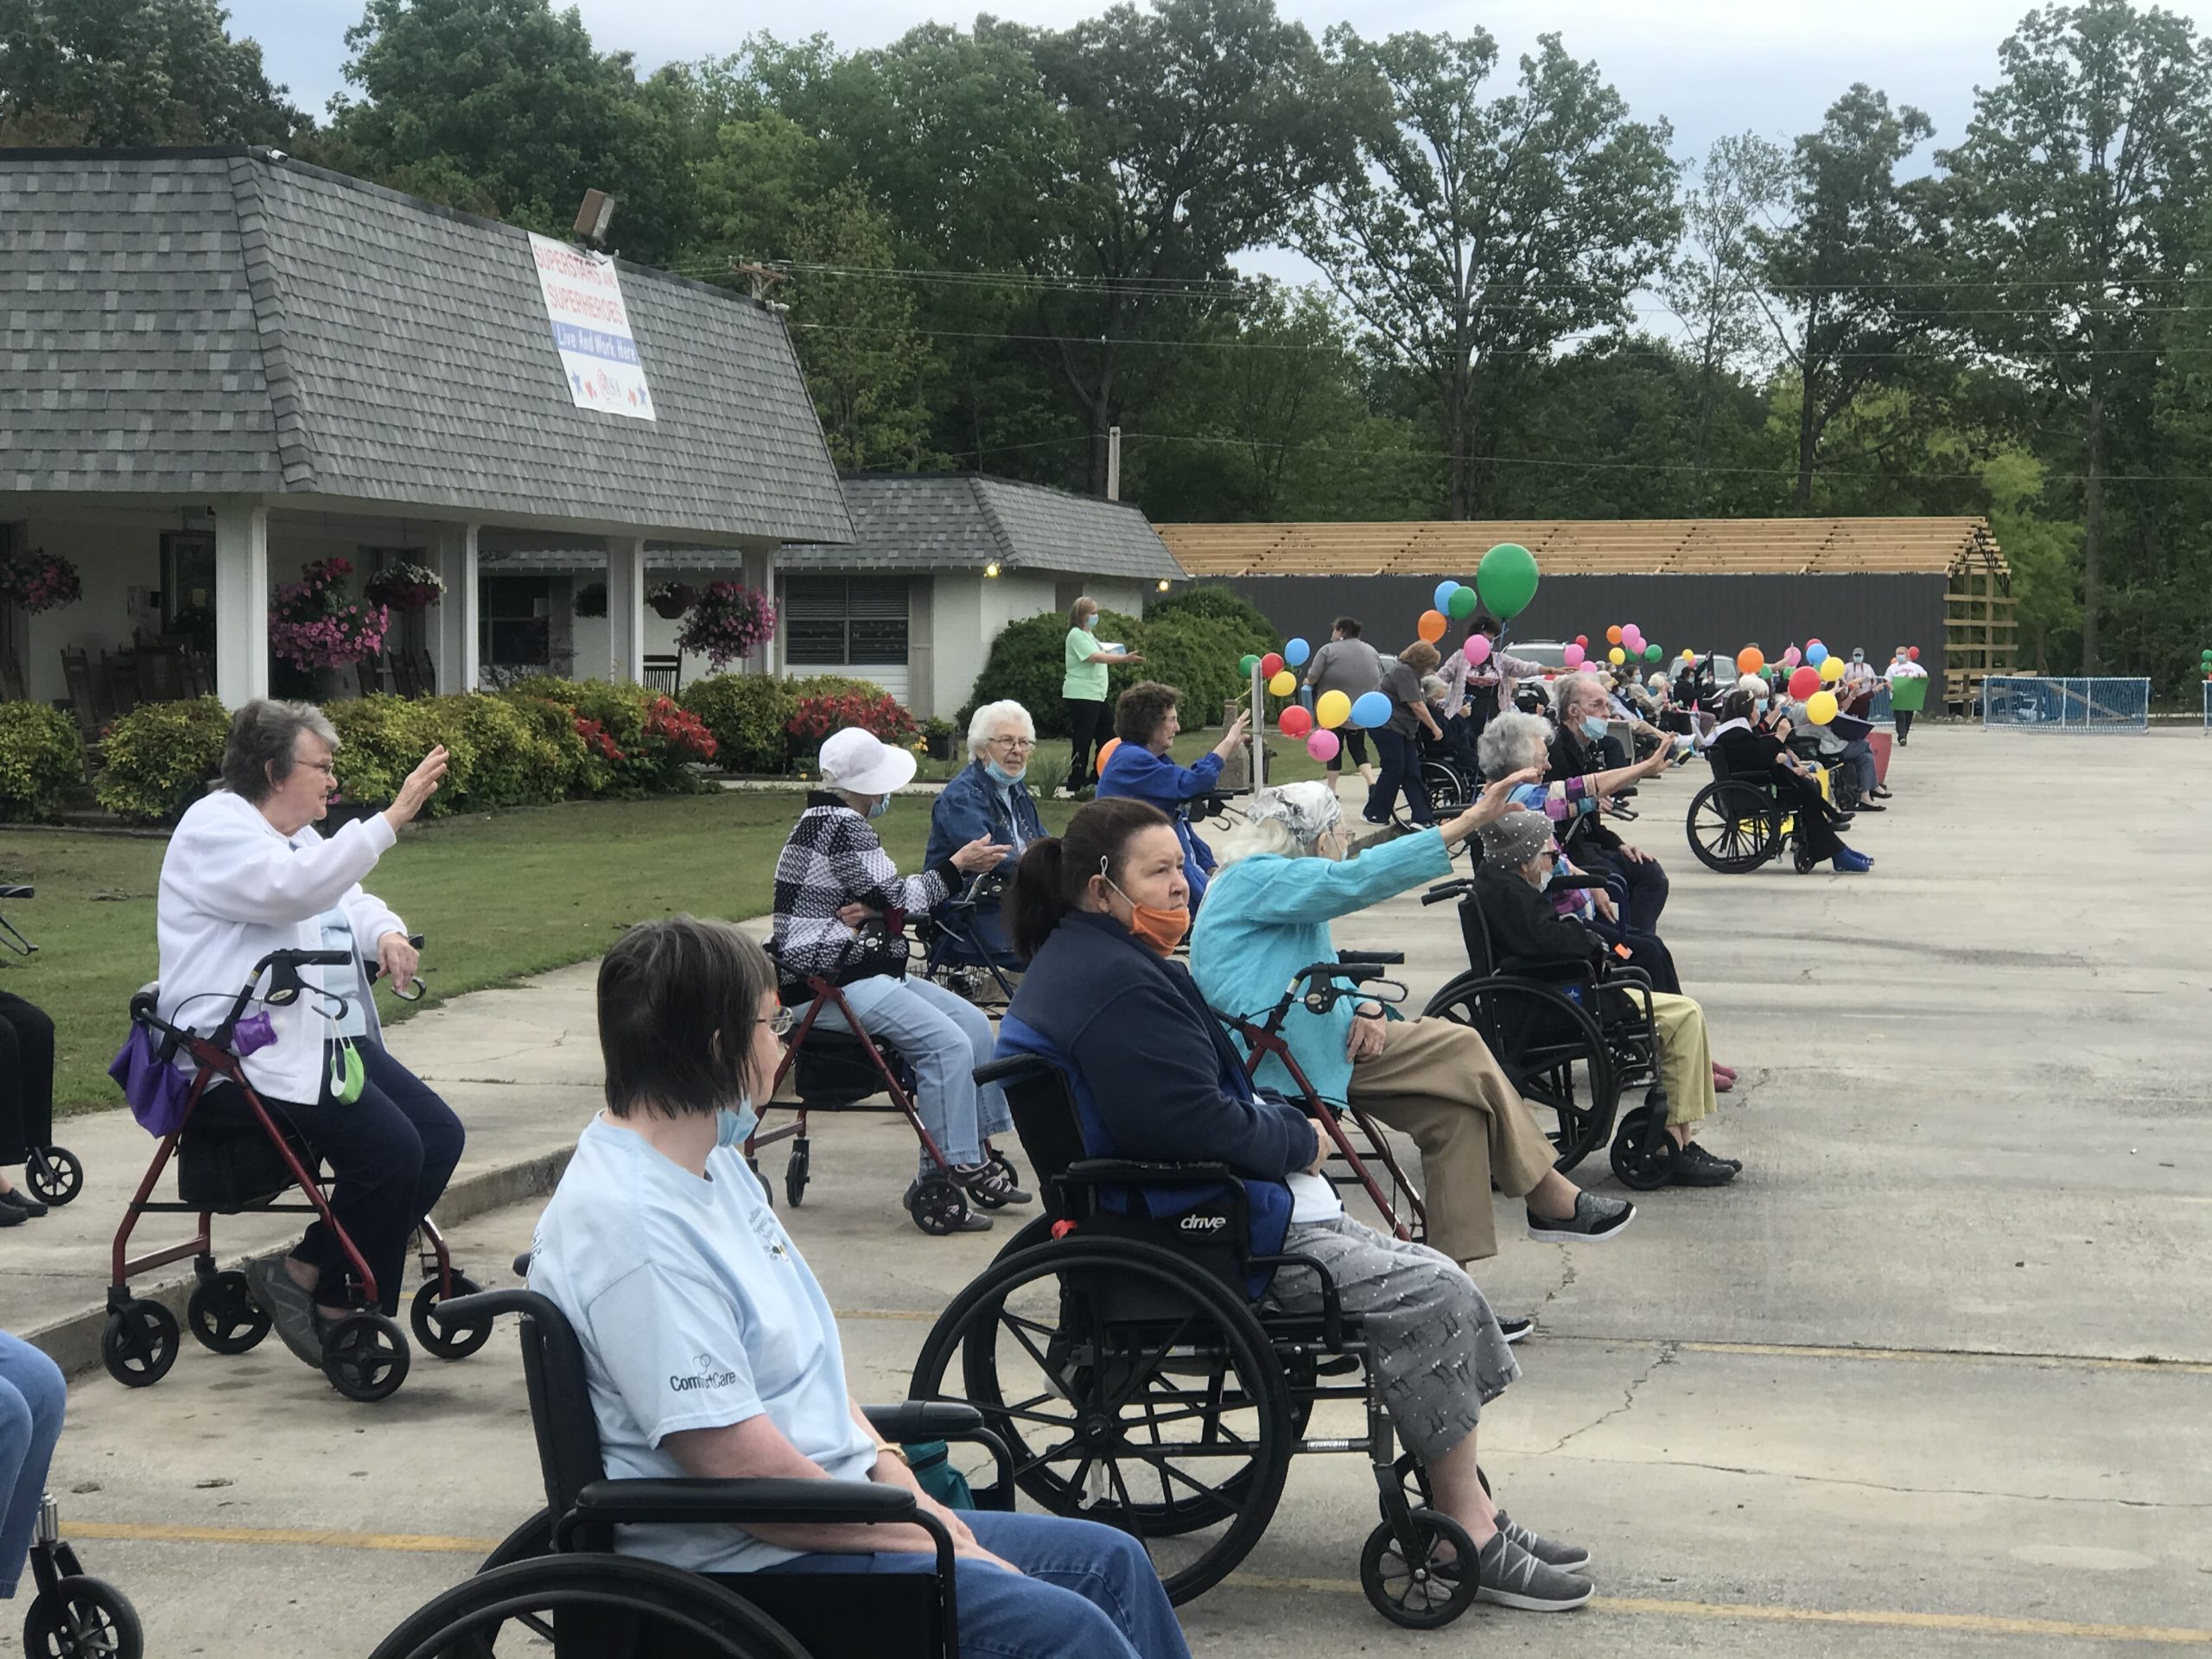 Nothing but smiles at the 2nd annual Ridin’ for Residents Jeep Parade ...